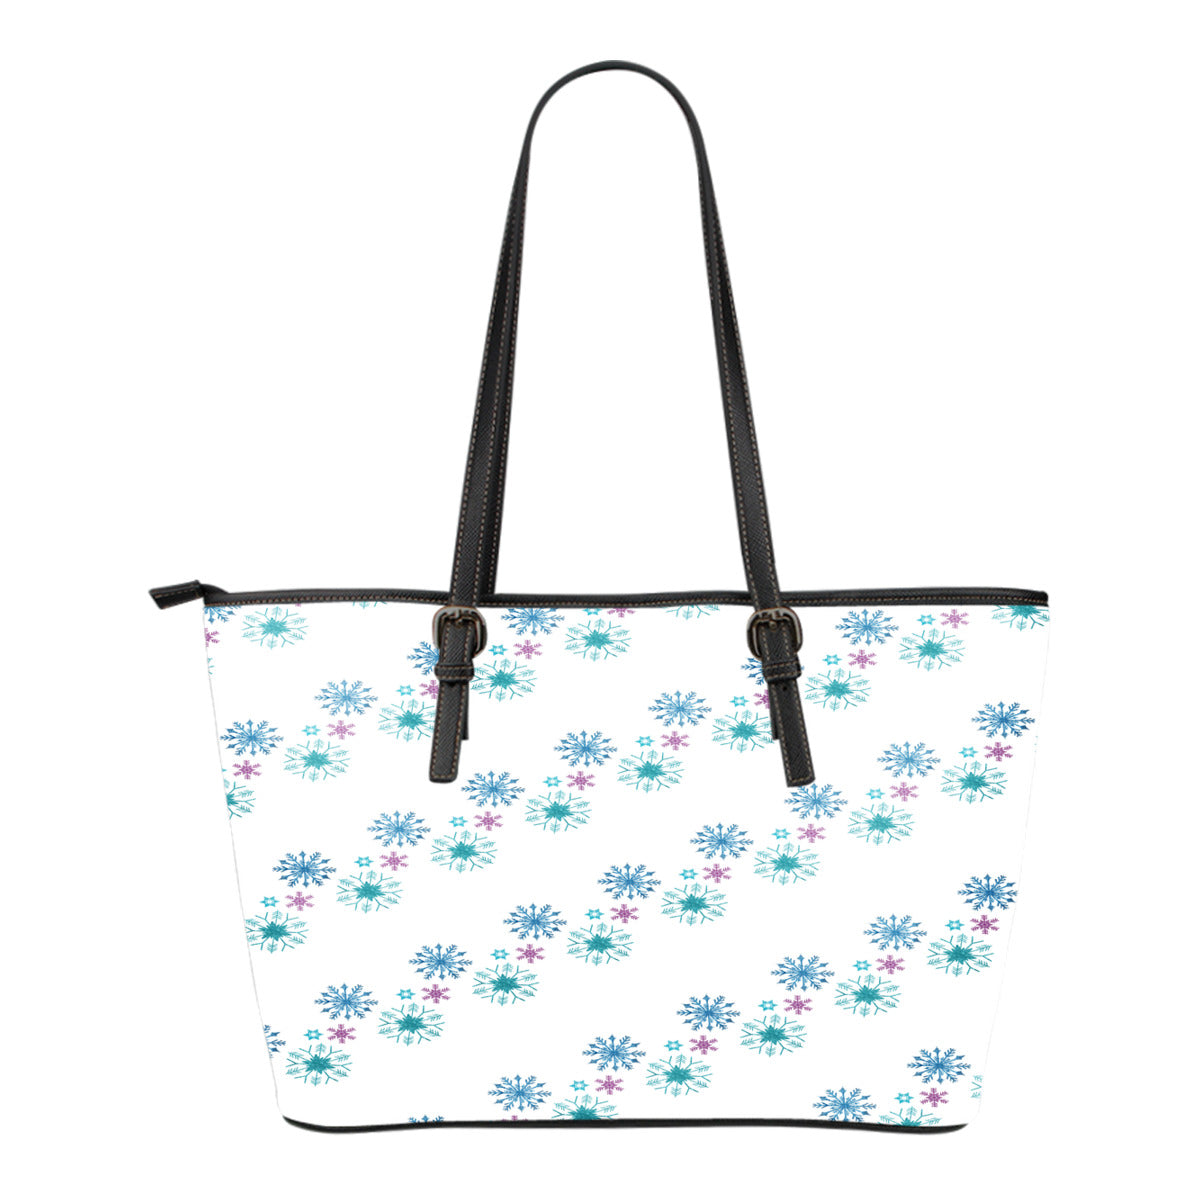 Frozen Themed Design C6 Women Small Leather Tote Bag